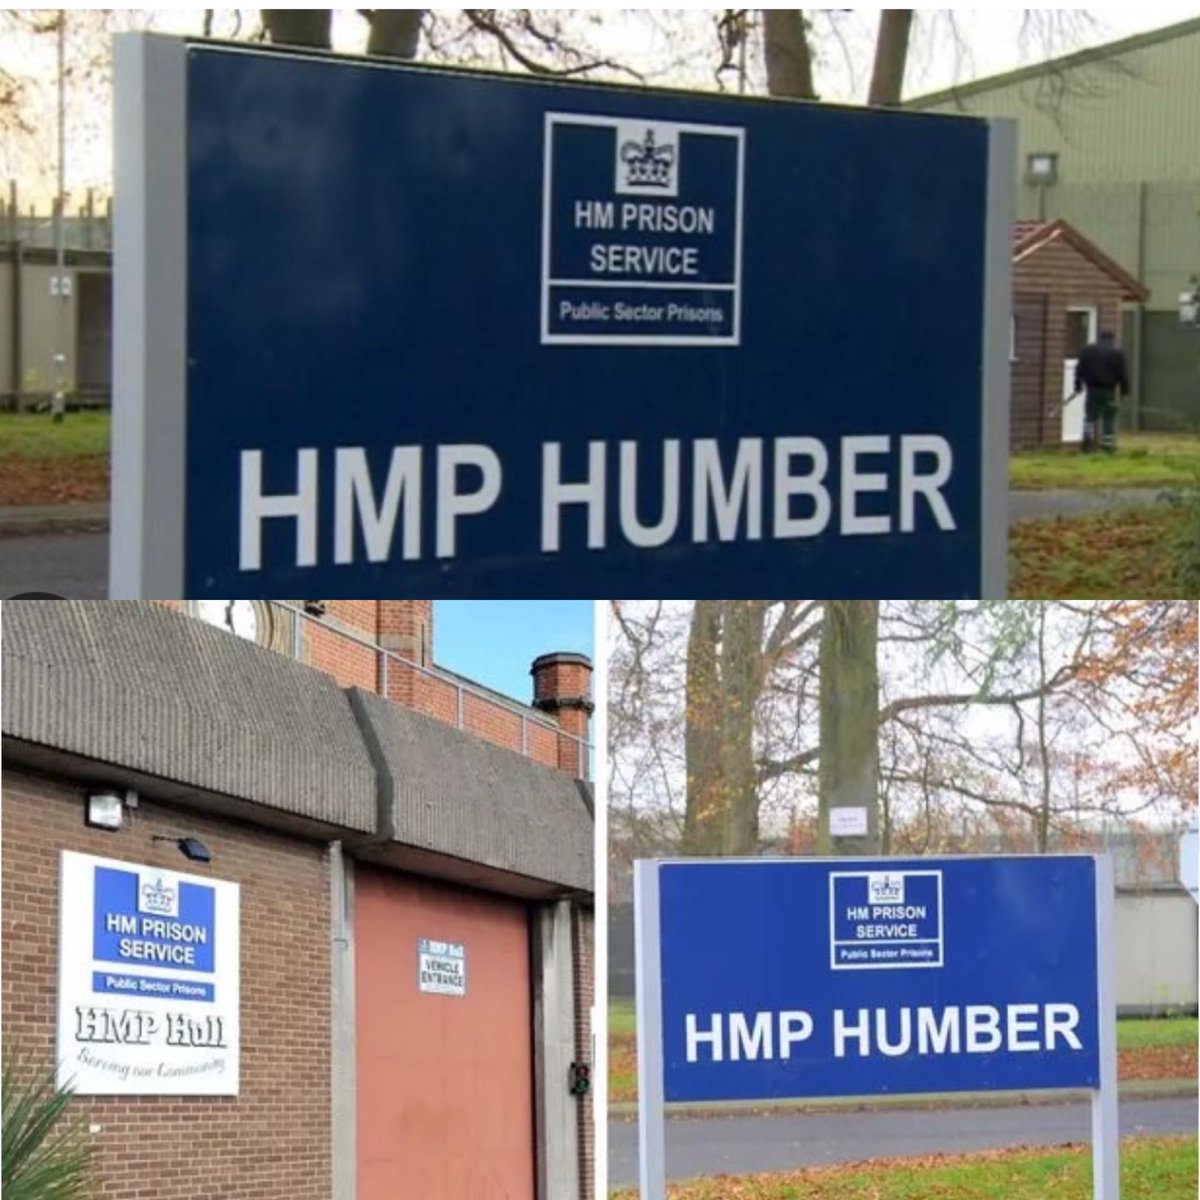 8 interviews held at HMP Humber a big CAT C prison was two prisons now one big one. The men I interviewed were selected by another great PEL so hopefully 8 employment roles opening up - hope abounds and lives hopefully changed.